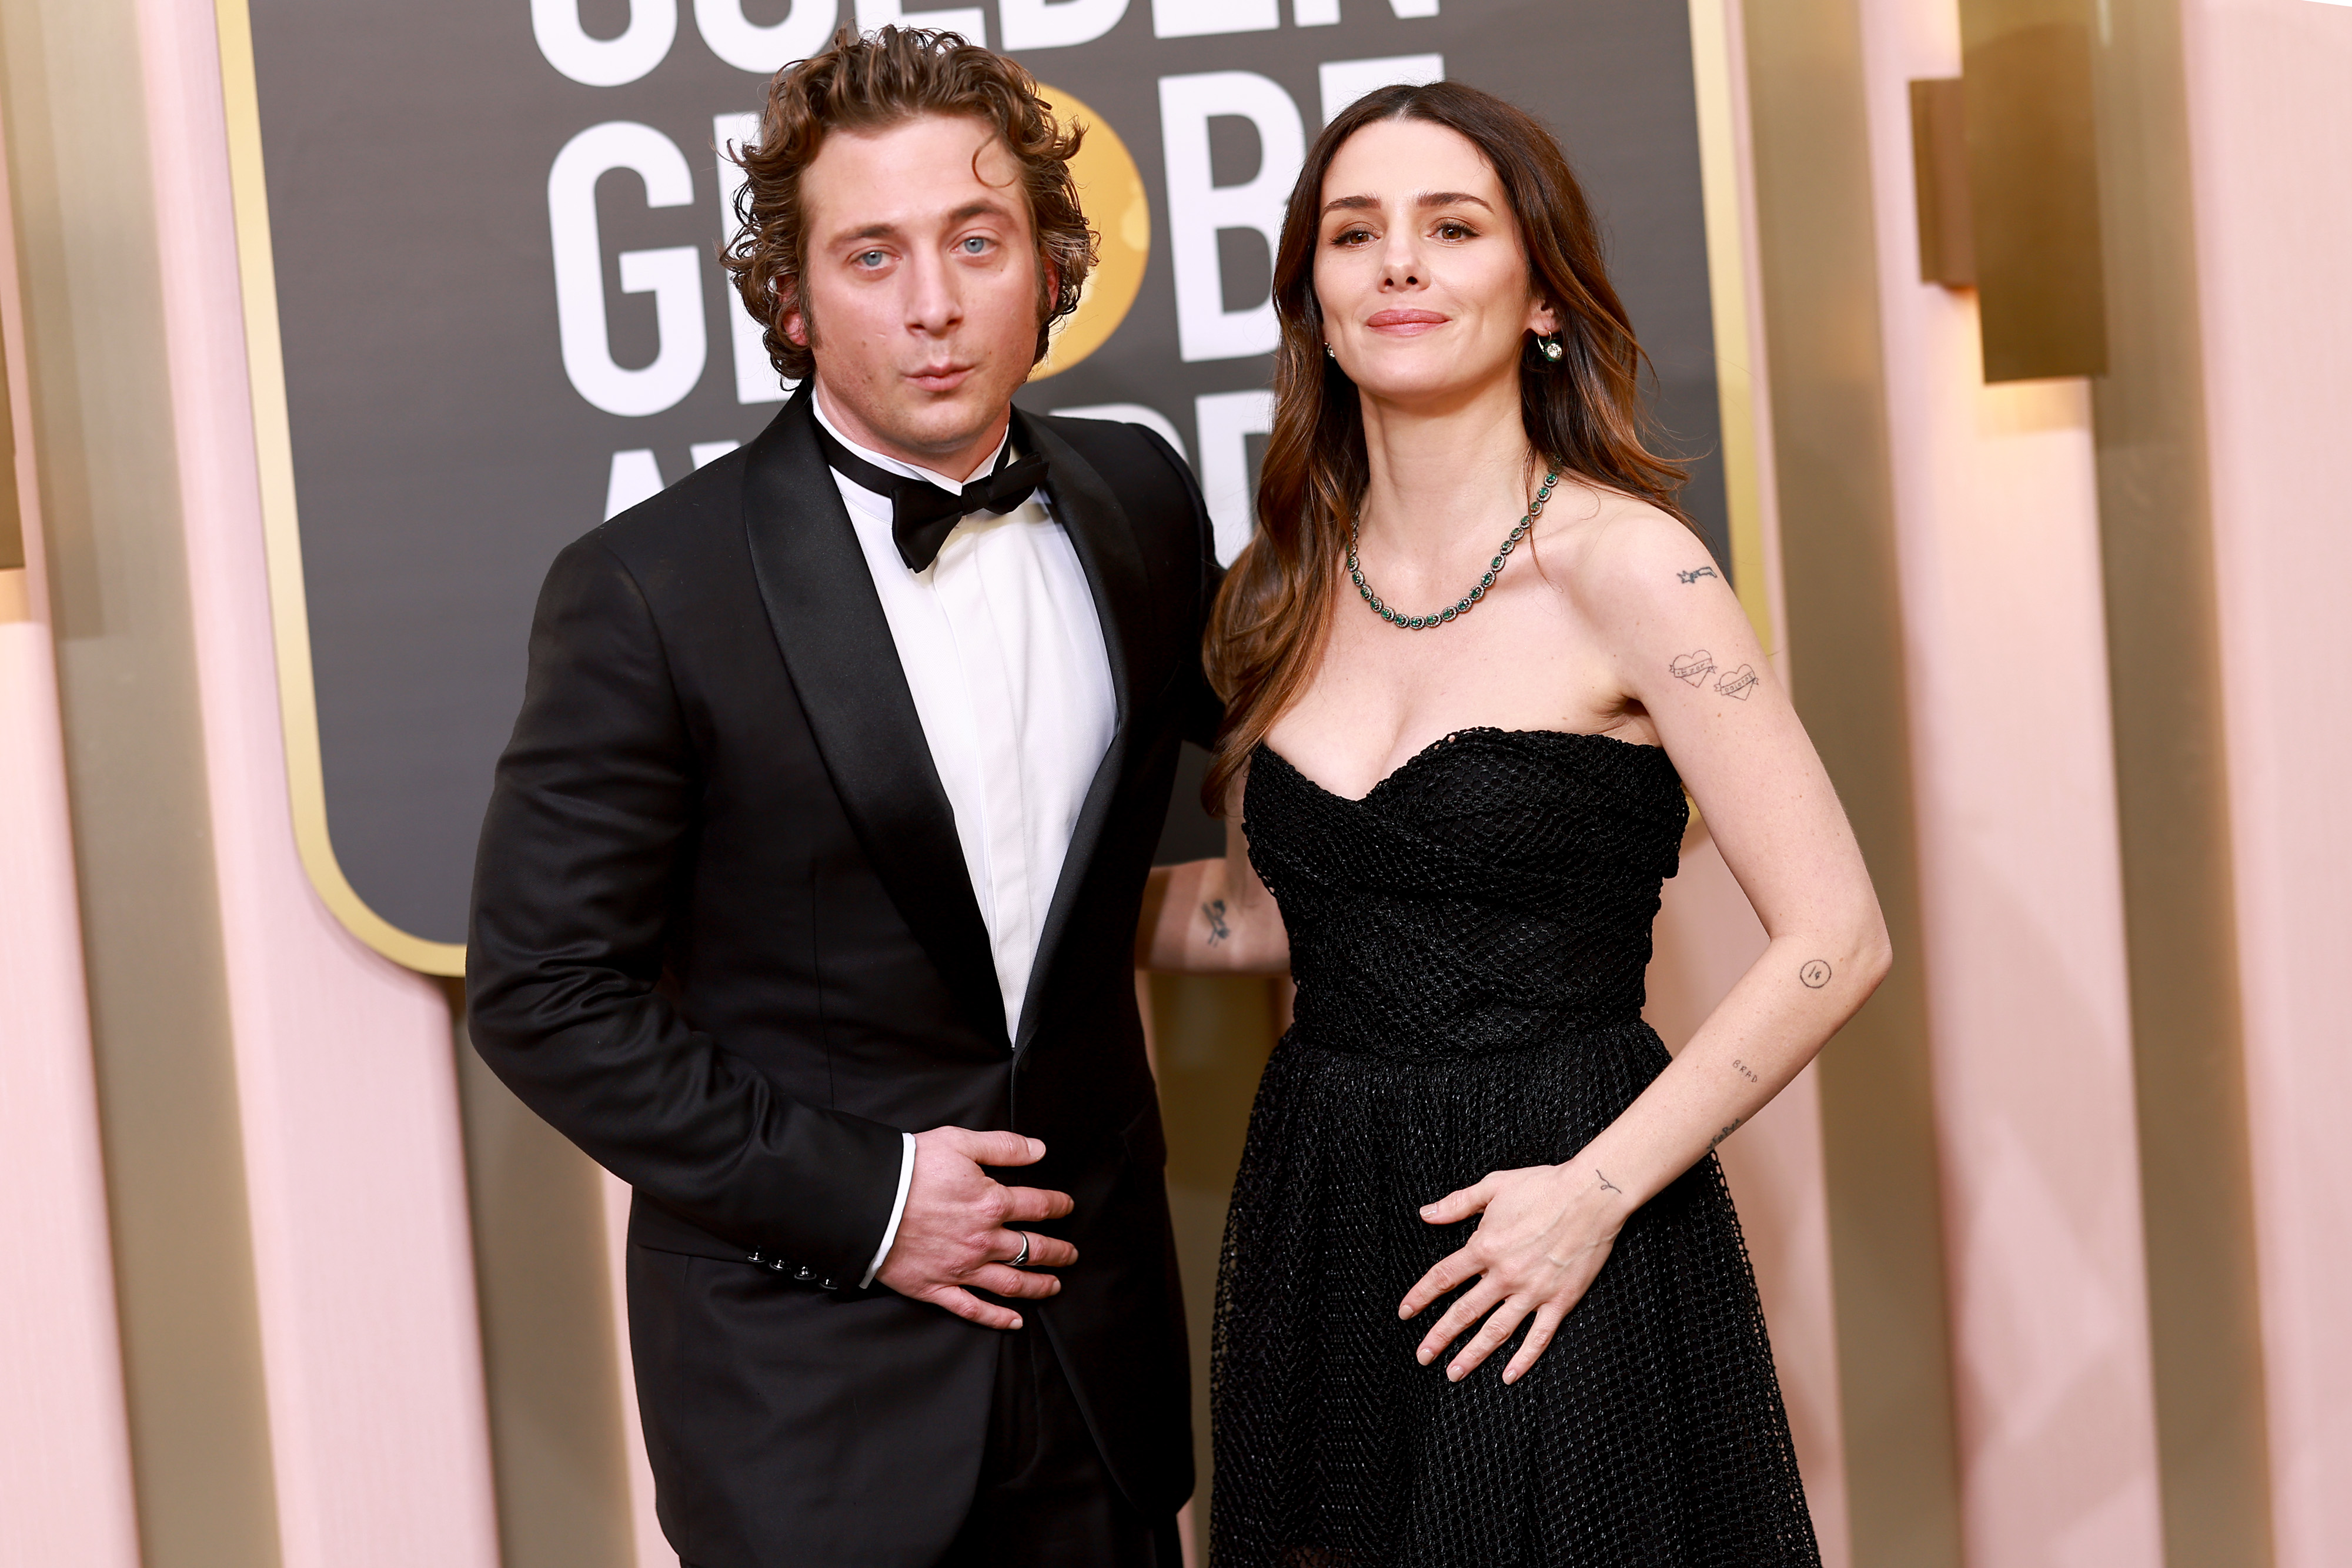 Jeremy Allen White and Addison Timlin attend the 80th Annual Golden Globe Awards in Beverly Hills, California on January 10, 2023. | Source: Getty Images